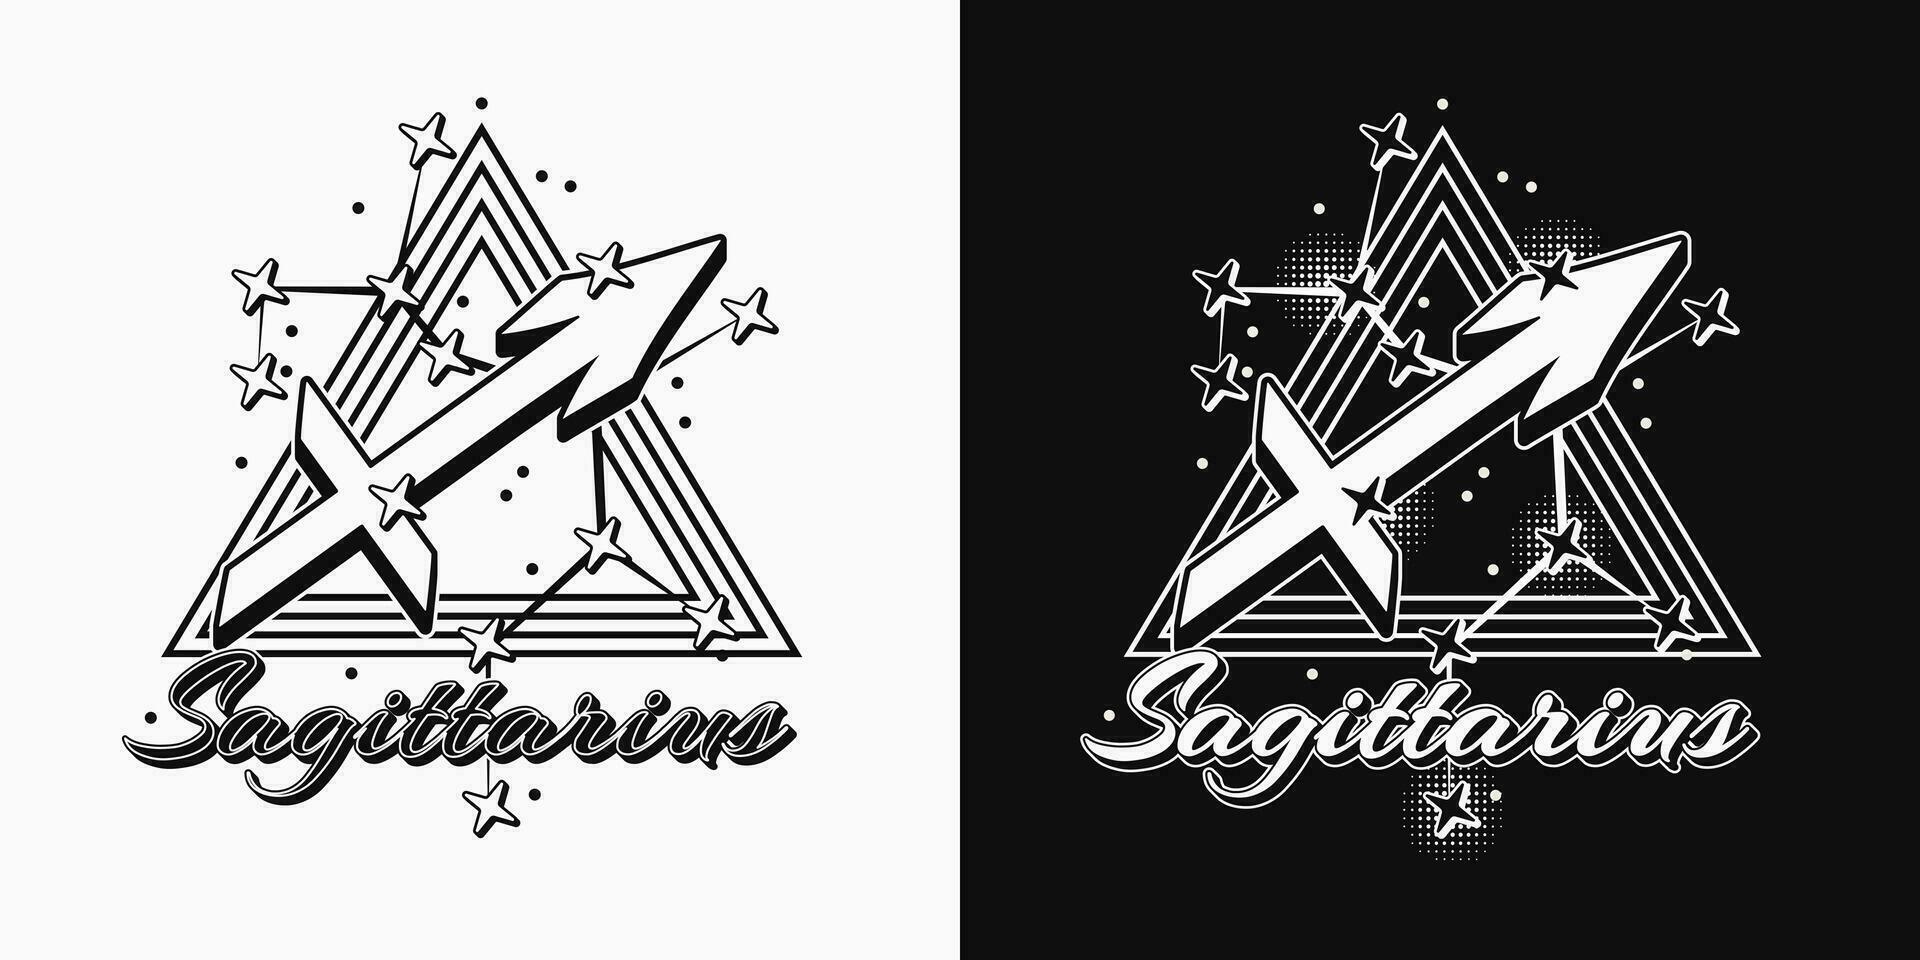 Monochrome icon of zodiac sign Sagittarius with constellation with stars, text, triangle as alchemical symbol for fire element. Horoscope esoteric design elements. Vintage style. vector